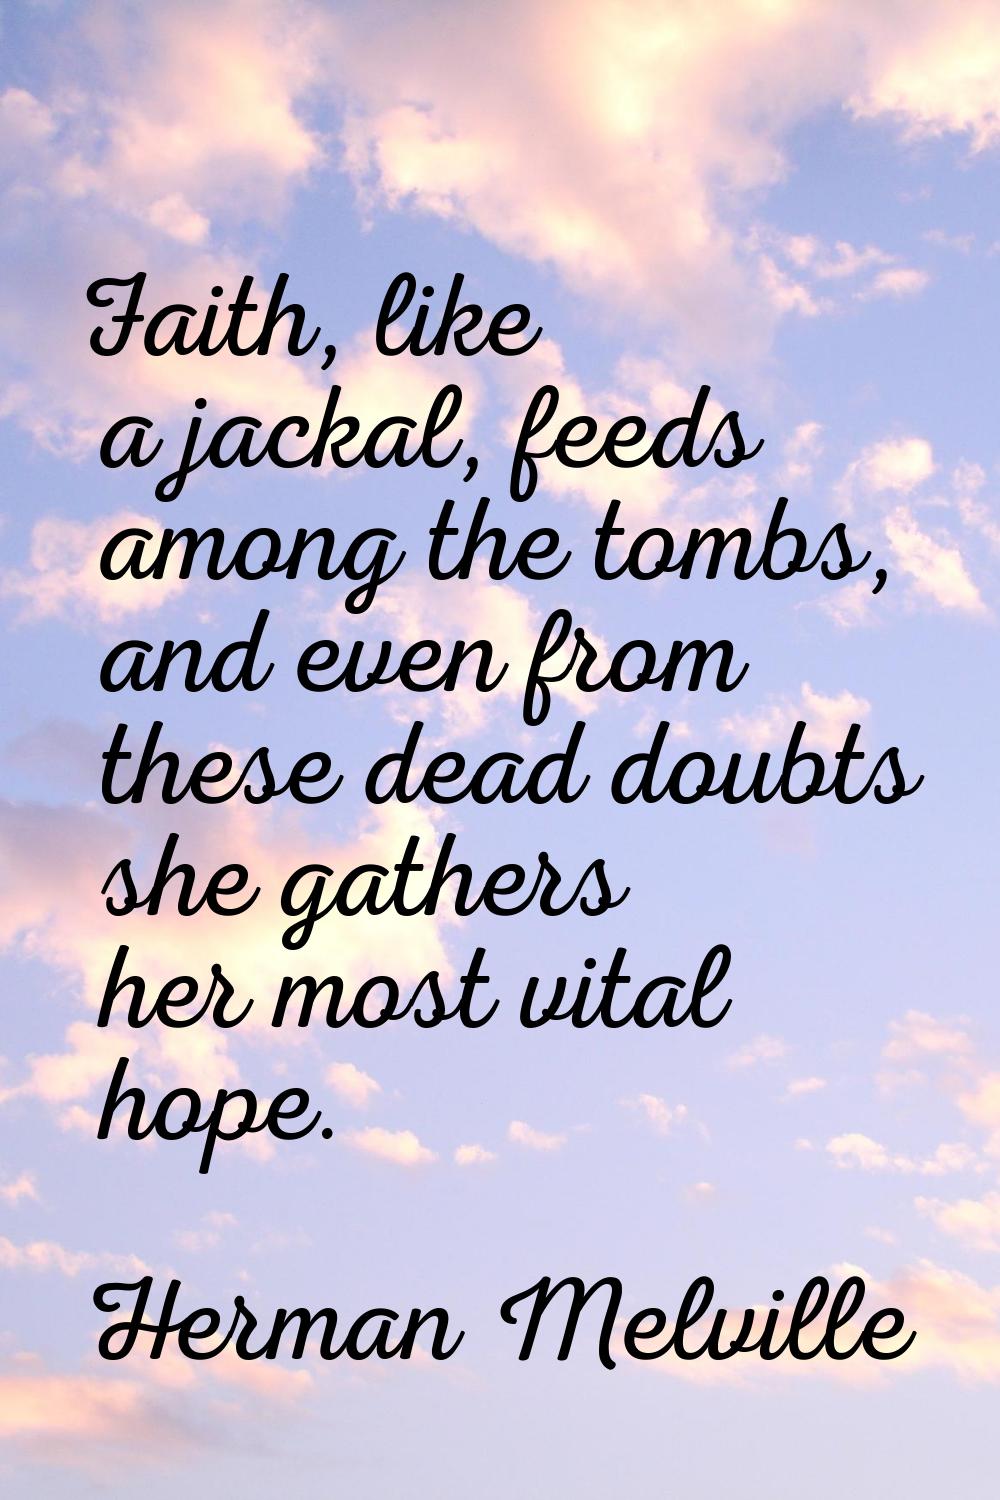 Faith, like a jackal, feeds among the tombs, and even from these dead doubts she gathers her most v